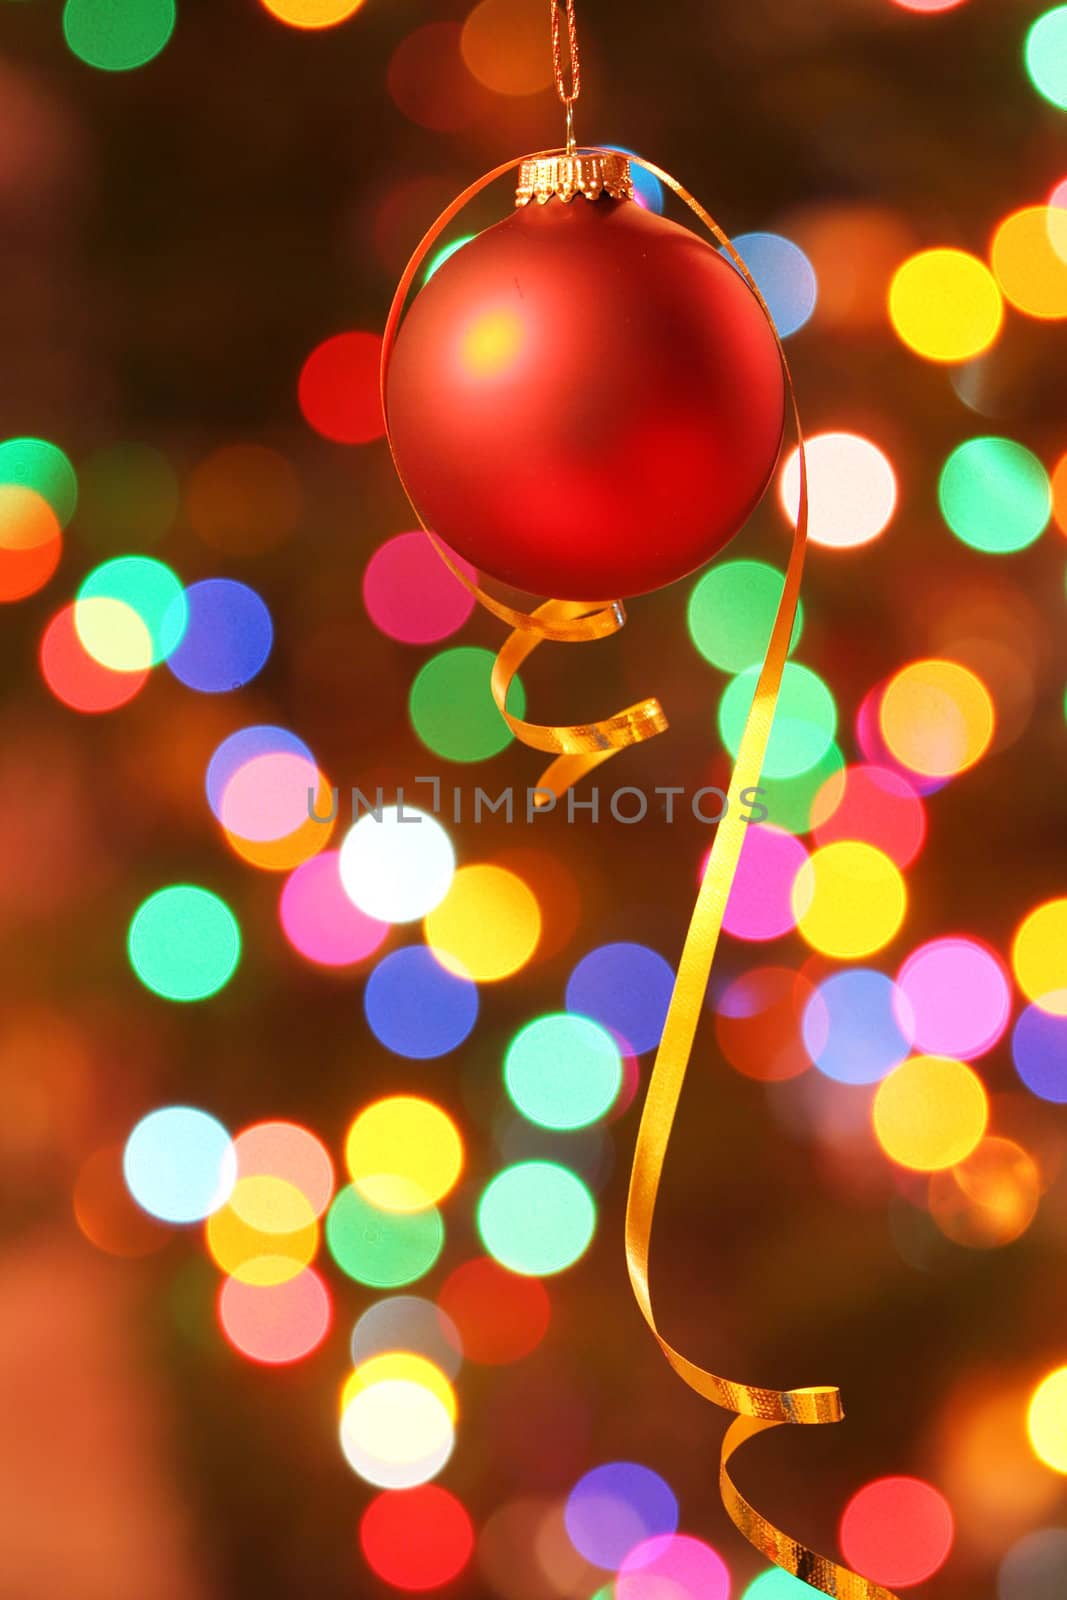 Red frosted Christmas ornament  by jarenwicklund